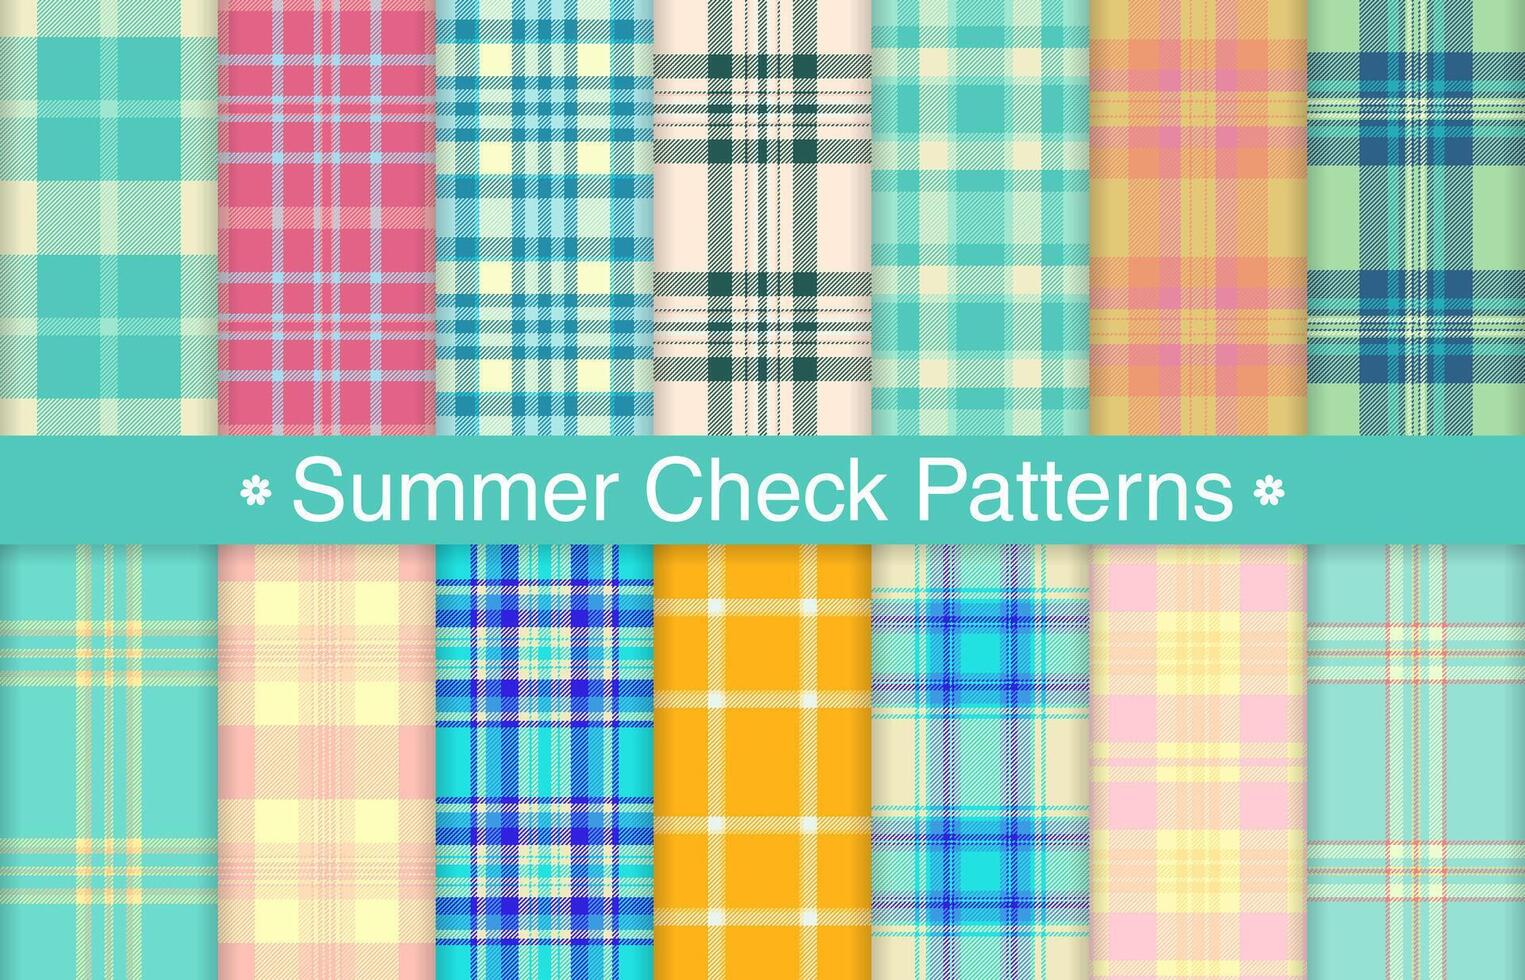 Summer plaid bundles, textile design, checkered fabric pattern for shirt, dress, suit, wrapping paper print, invitation and gift card. vector